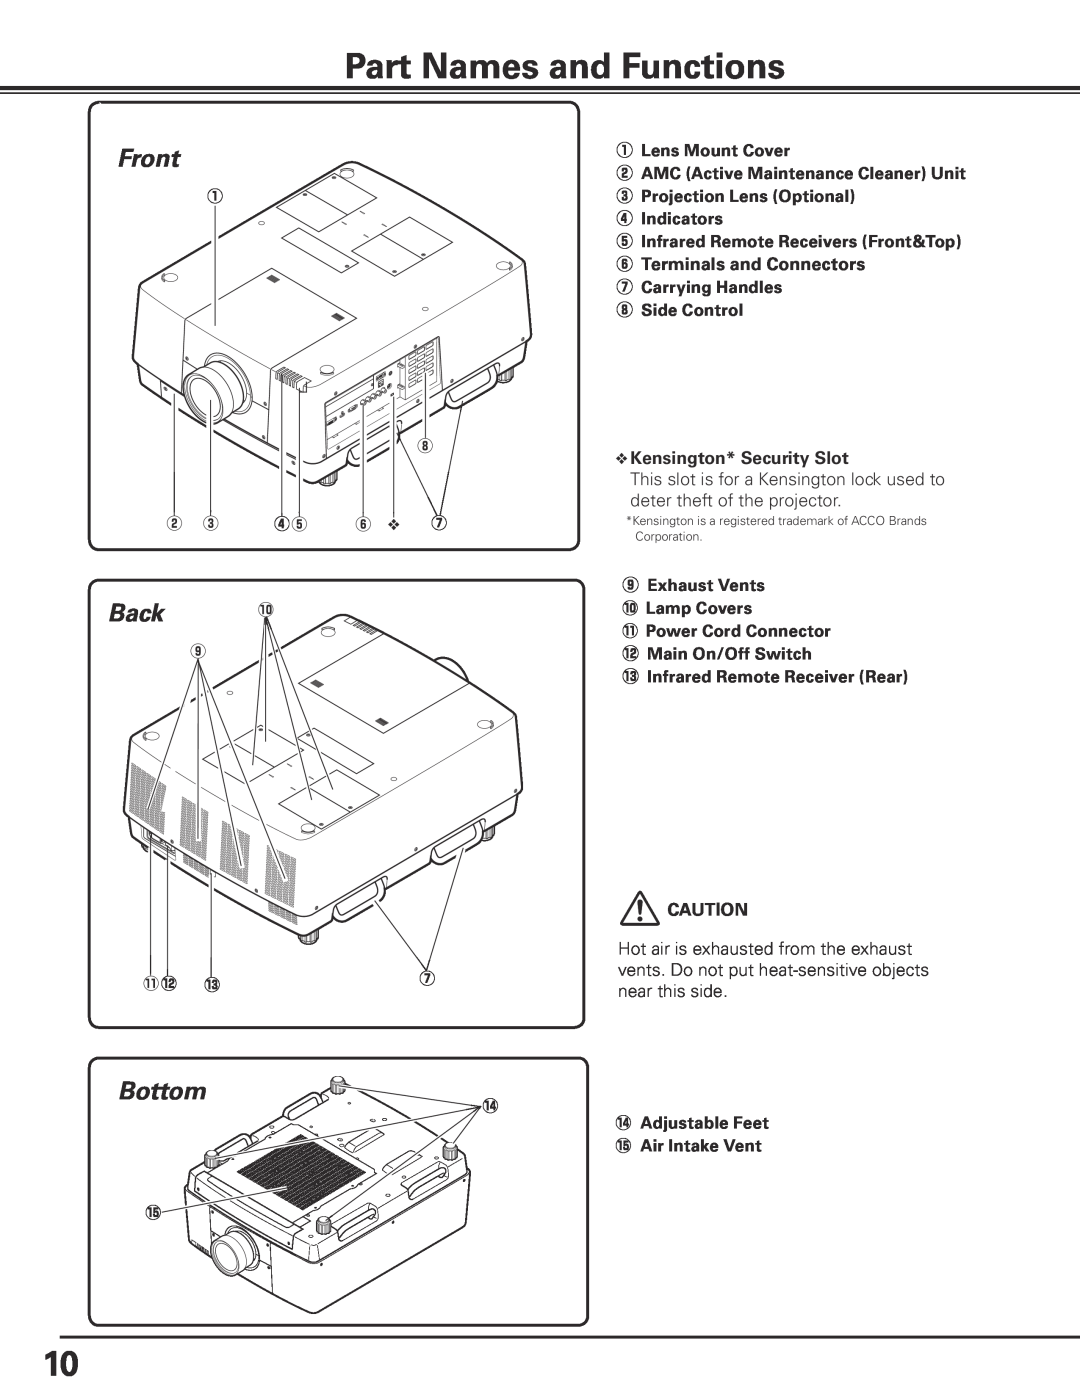 Sanyo HF15000L Part Names and Functions, Front, Back, Bottom, qLens Mount Cover, w AMC Active Maintenance Cleaner Unit 